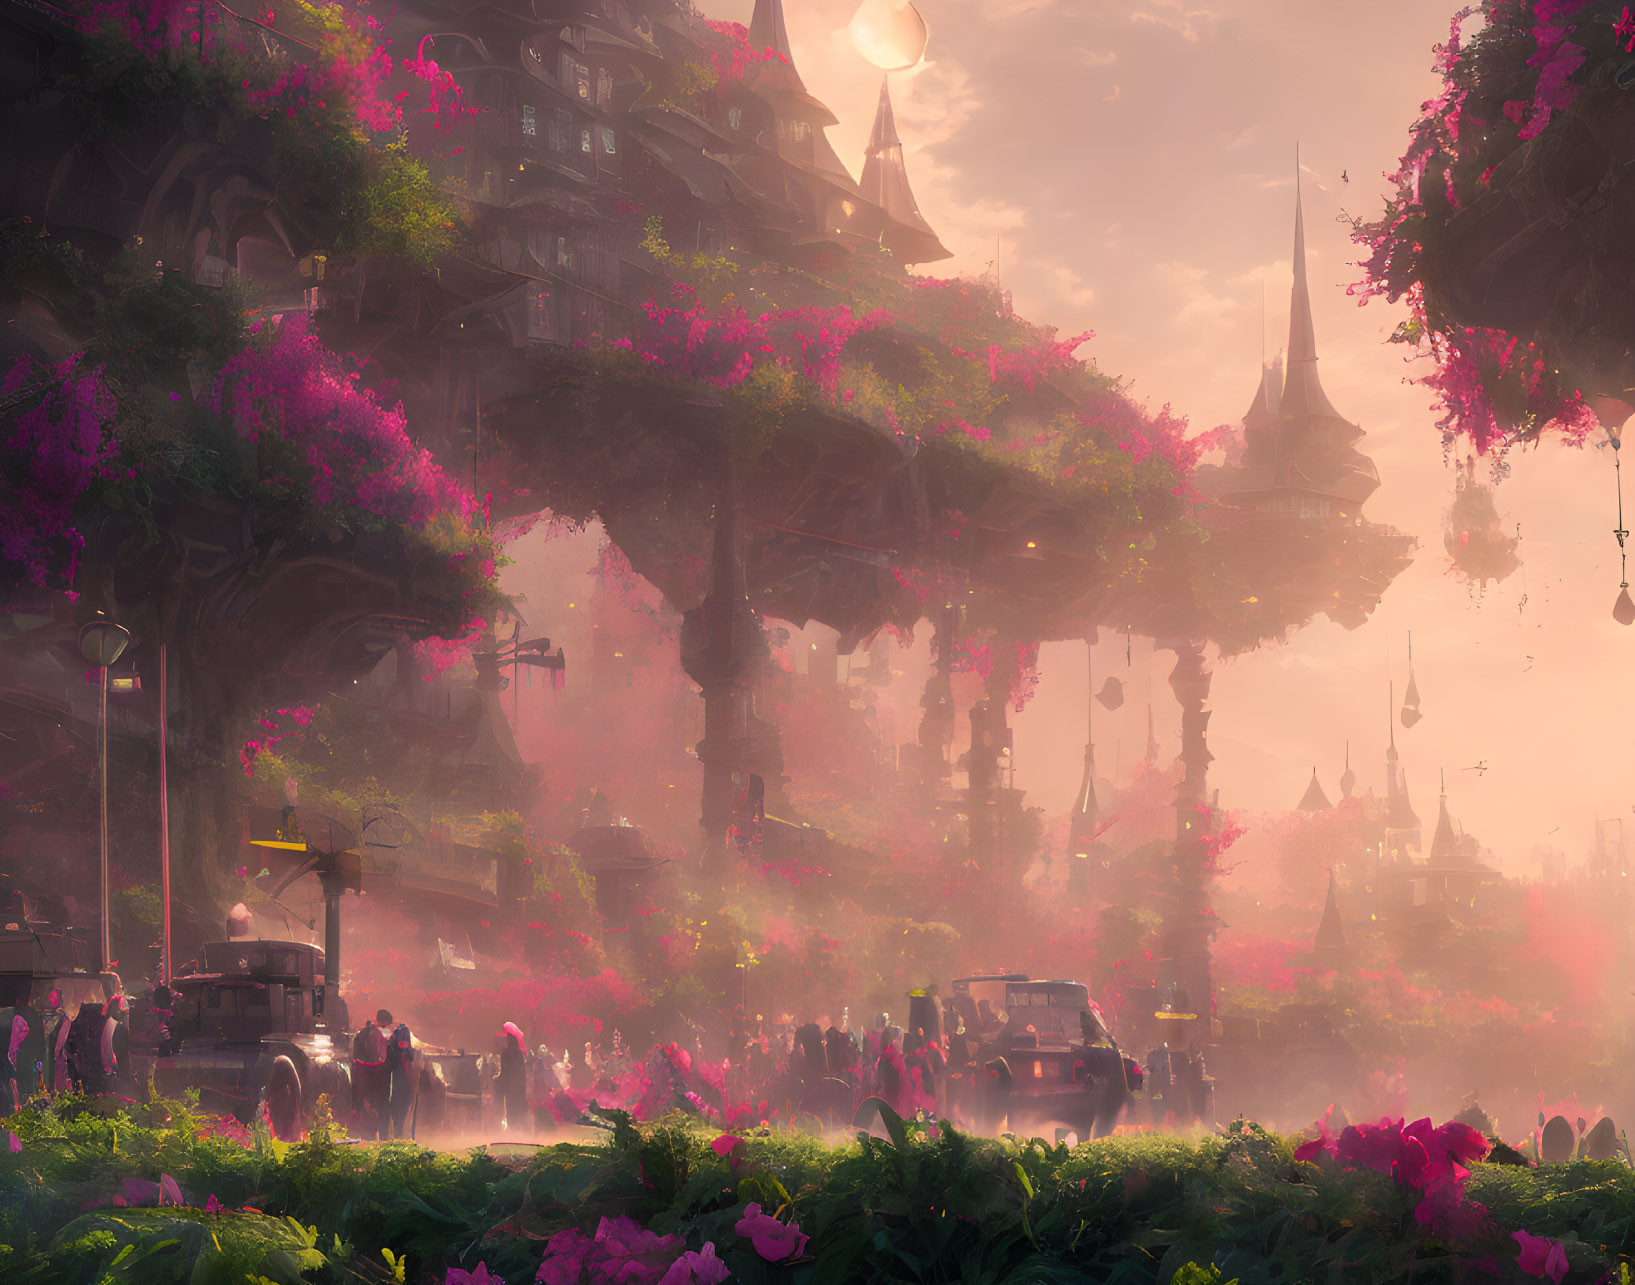 Fantastical cityscape with pink trees, flying ships, vintage cars, and intricate architecture.